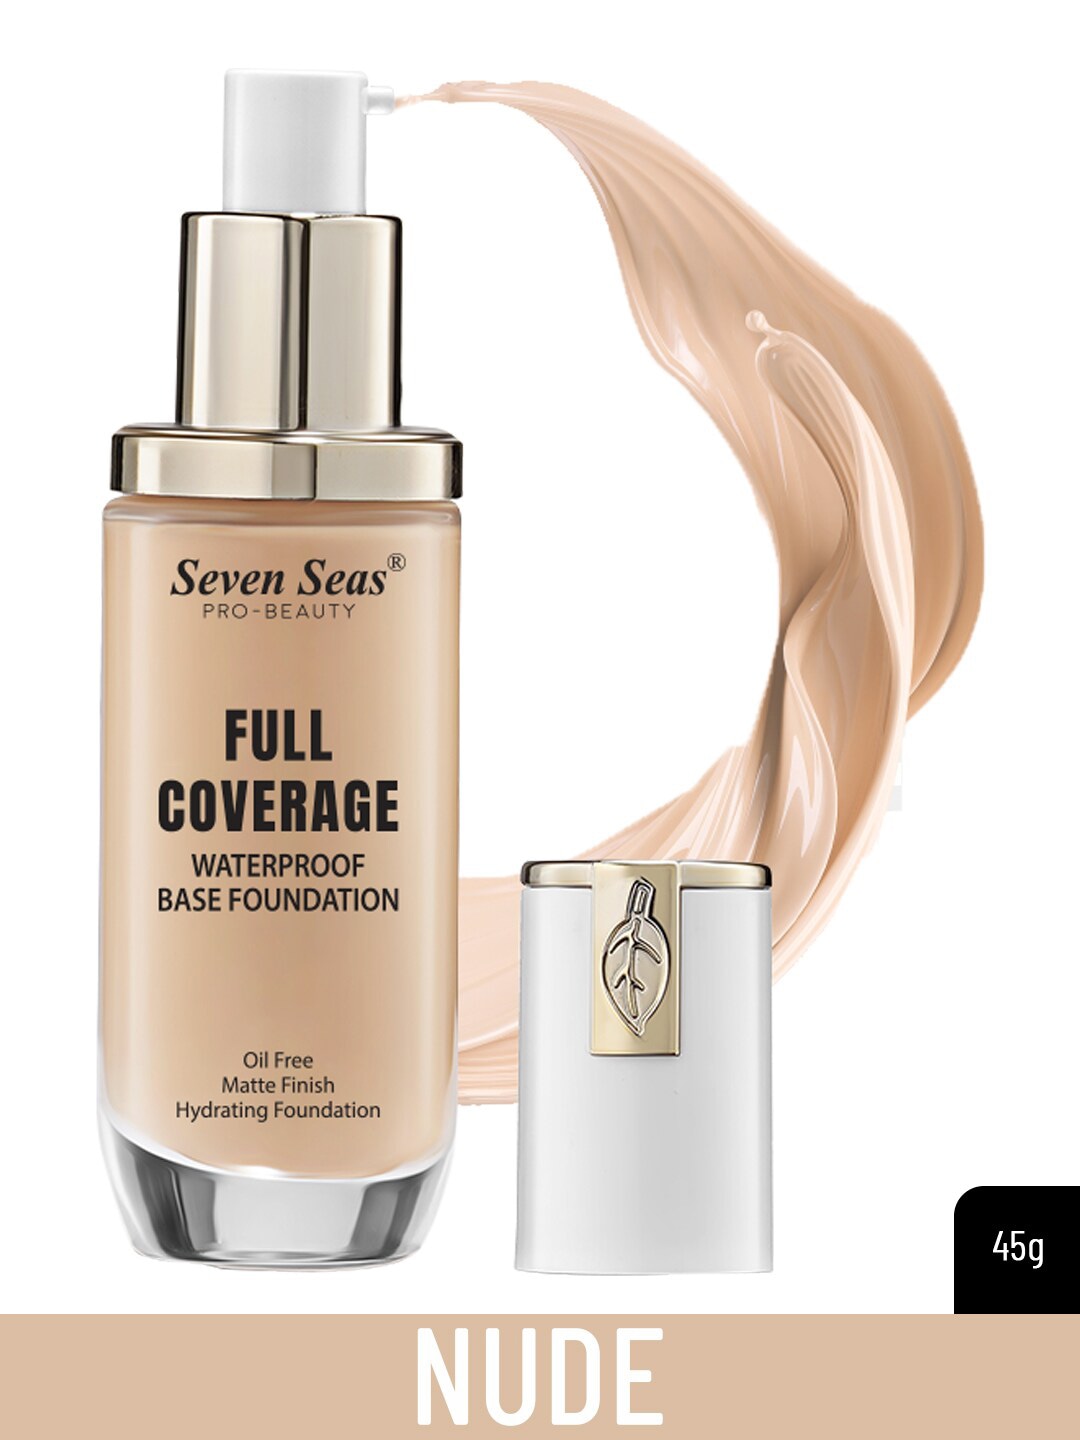 Seven Seas Full Coverage Waterproof Matte Finish Base Foundation - Nude Price in India